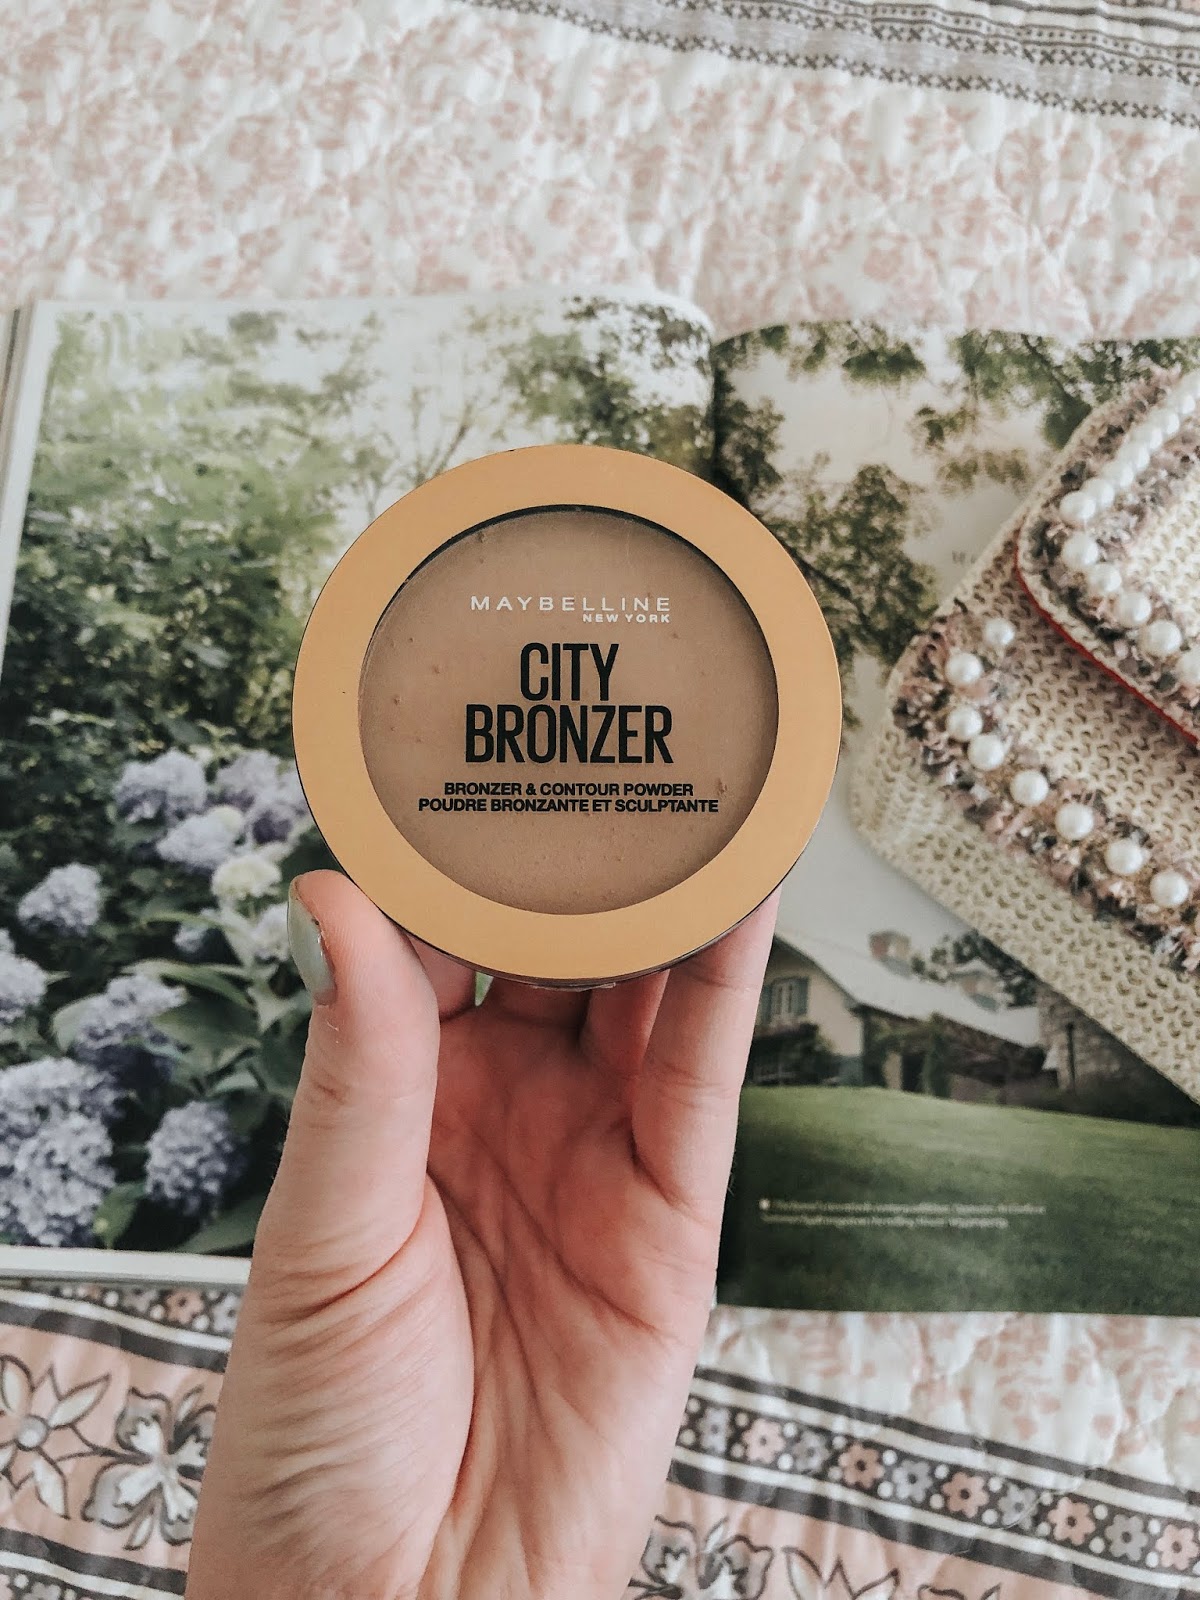 Maybelline City Bronzer - Top 4 Drugstore Face and Body Bronzers For Pale Skin 